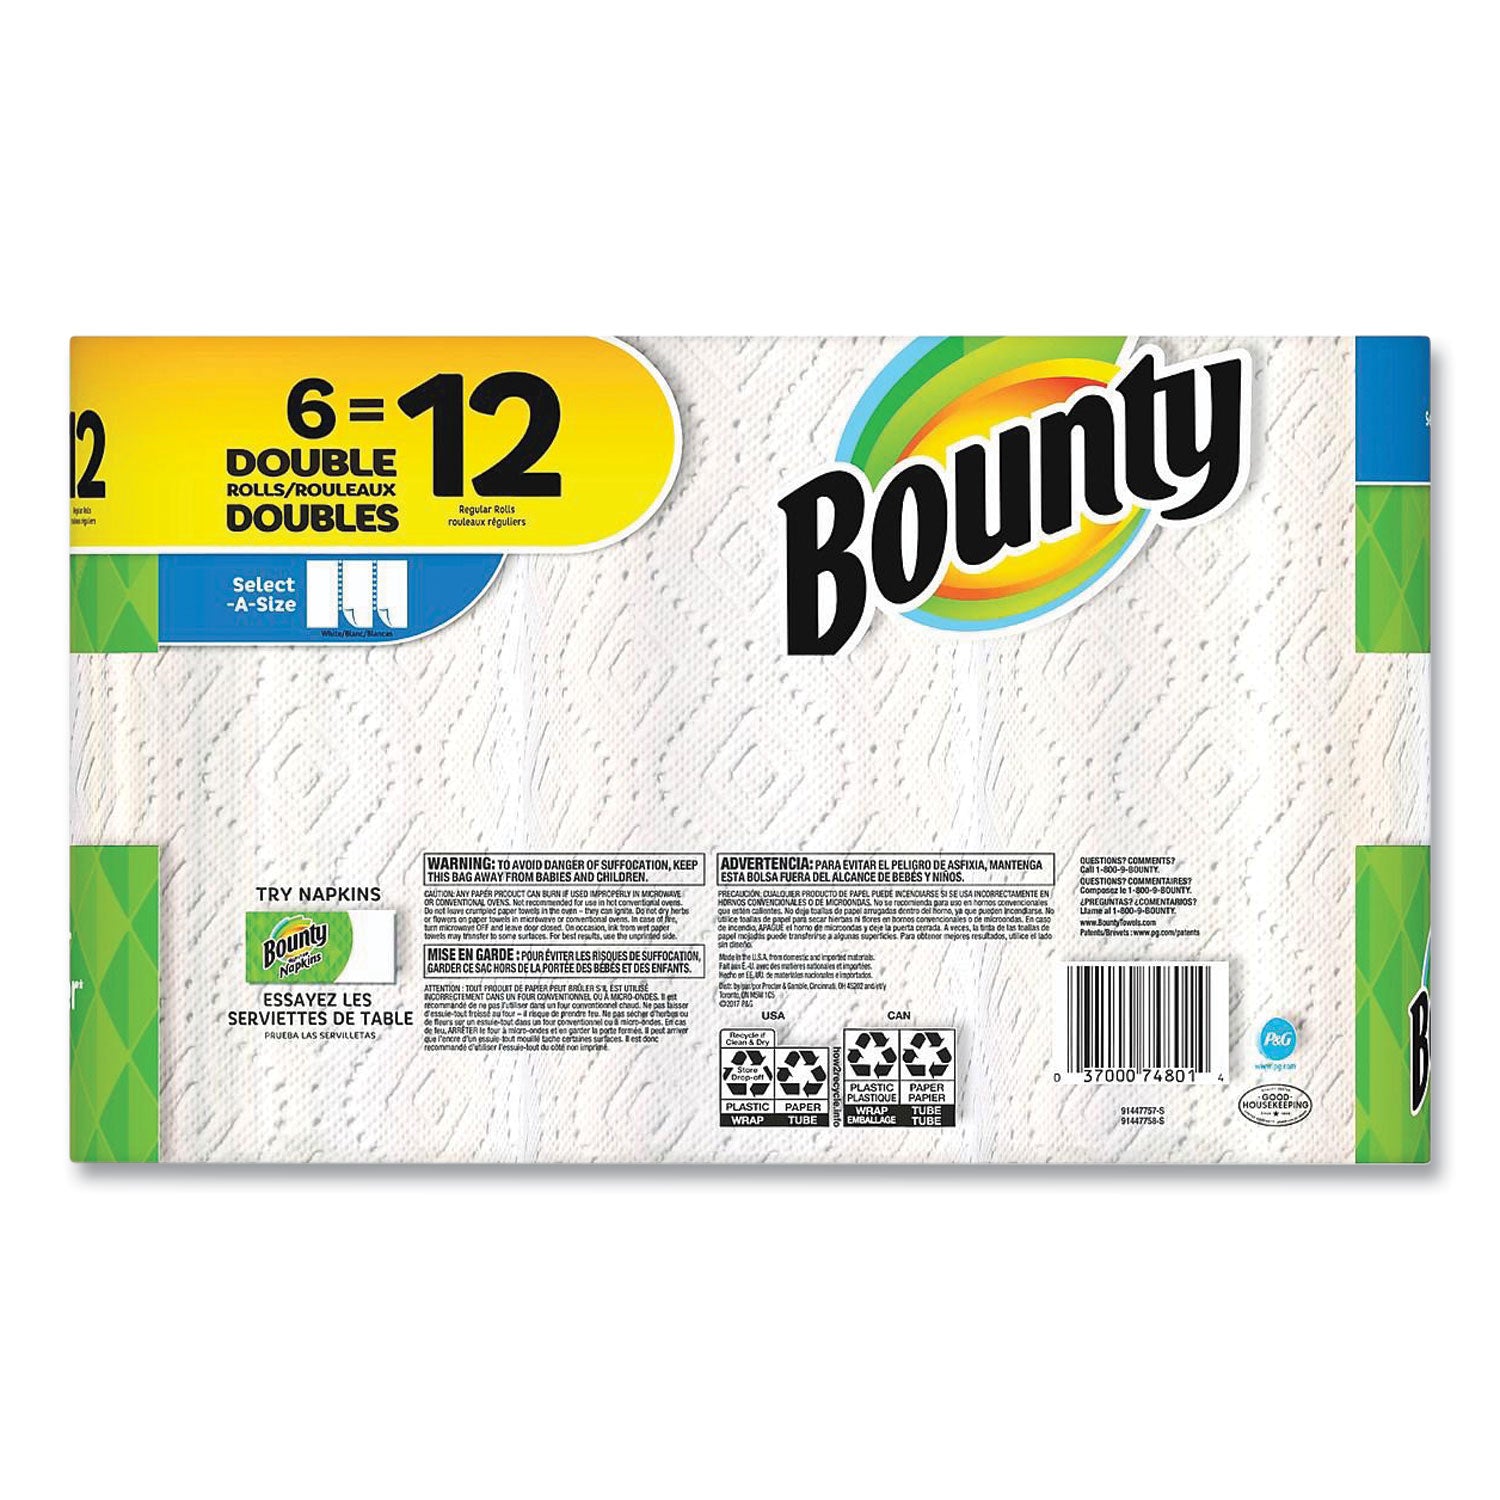 select-a-size-kitchen-roll-paper-towels-2-ply-white-59-x-11-110-sheets-roll-6-rolls-carton_pgc74801 - 6